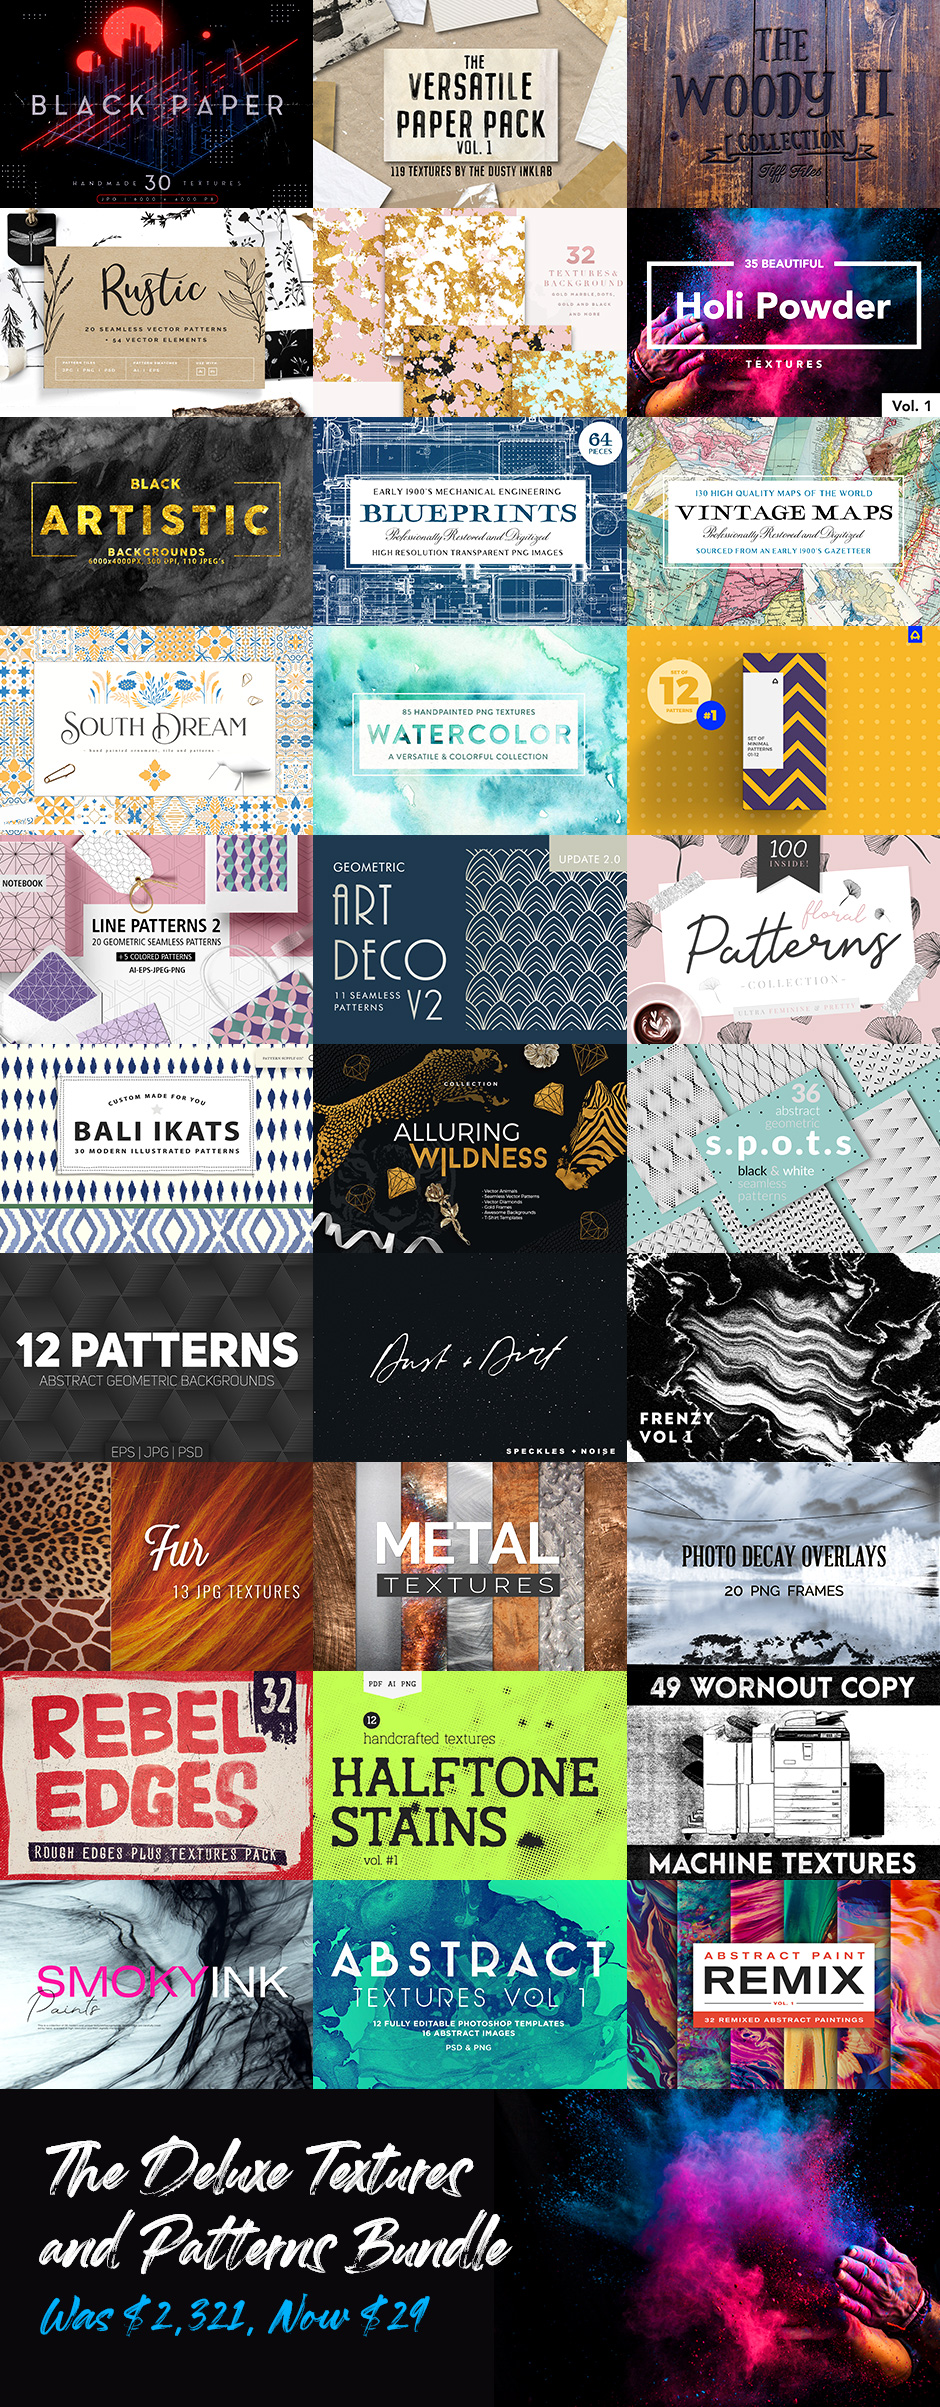 Product-Grid_Deluxe-Textures-Patterns.jpg